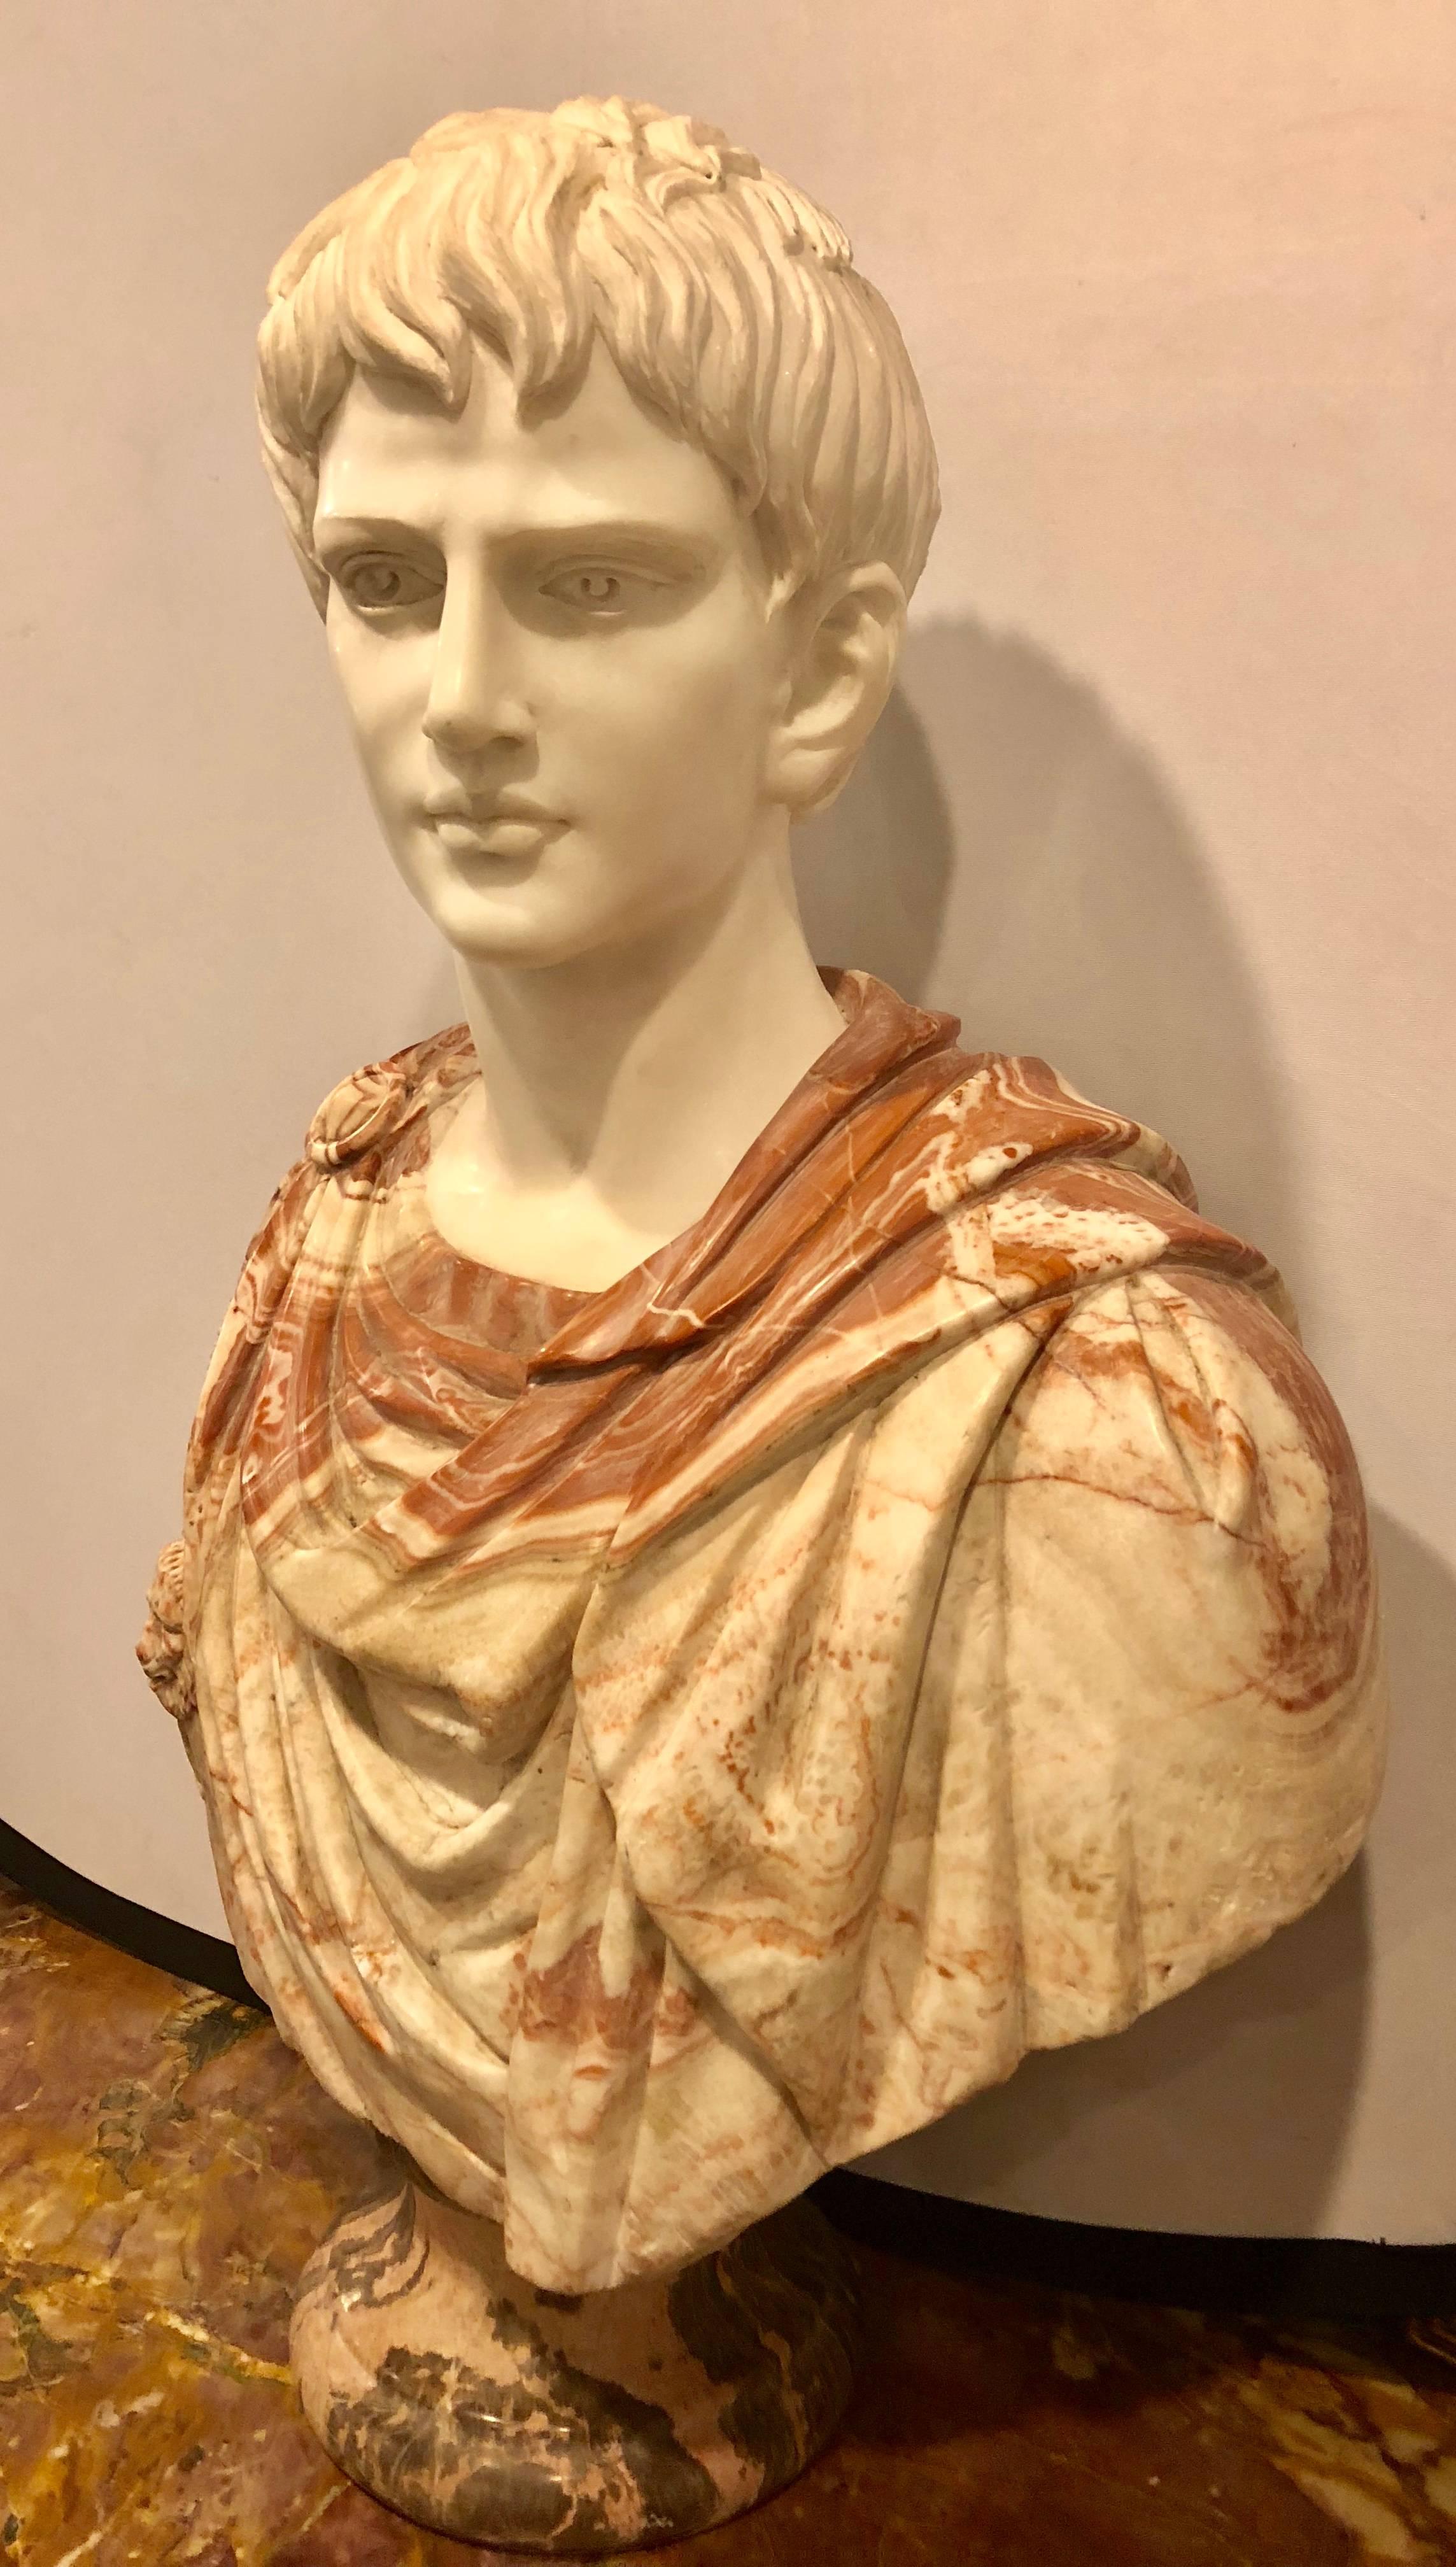 A full colorful marble bust of a young roman. This large and impressive bust is certain to make an impression as one views the fine detail and enormity of the sculpture.